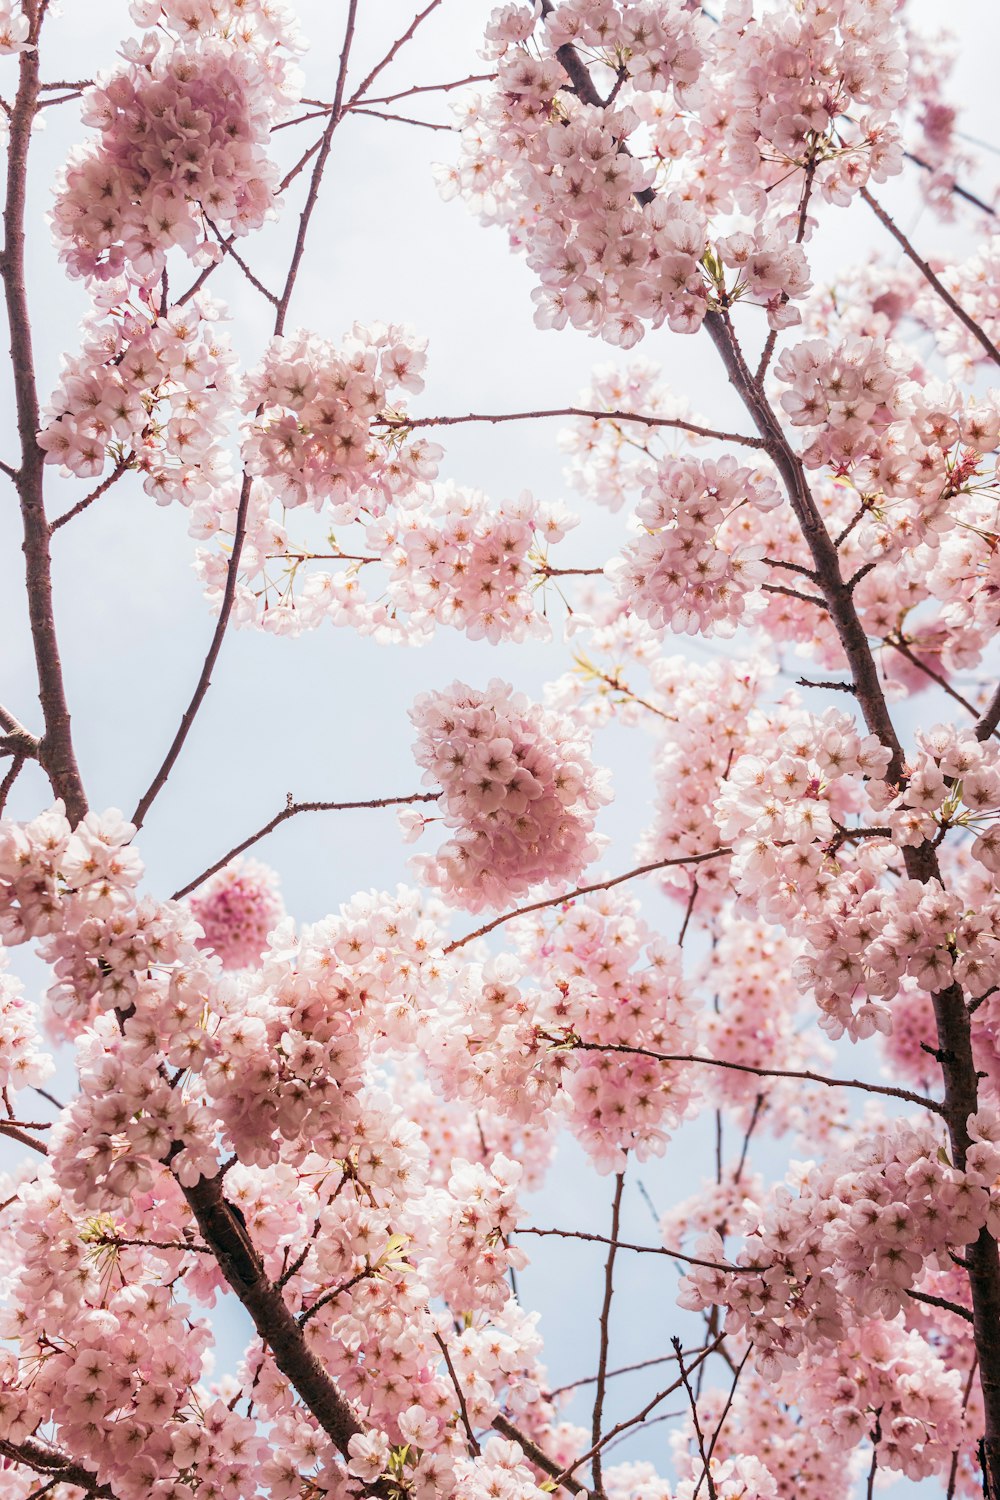 pink flowers are blooming on the branches of a tree